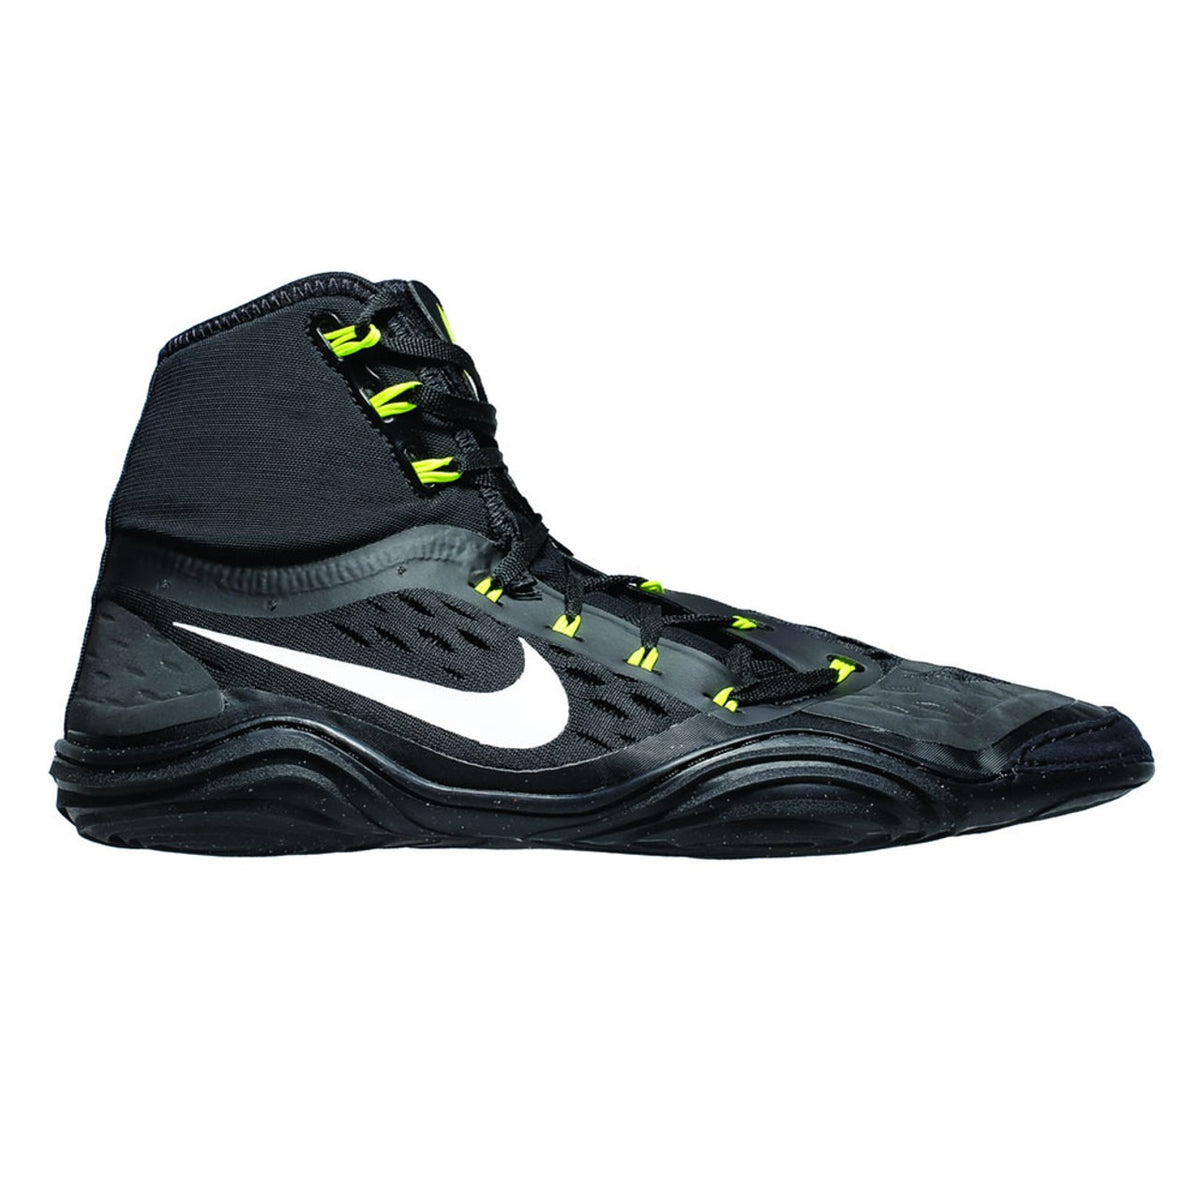 Nike wrestling shoes HYPERSWEEP LE. The professional wrestling shoe for all ambitious wrestlers. With the most advanced technology, the Nike Hypersweep gives you plenty of grip on the wrestling mat. In training and competition. Here in the color black/volt.